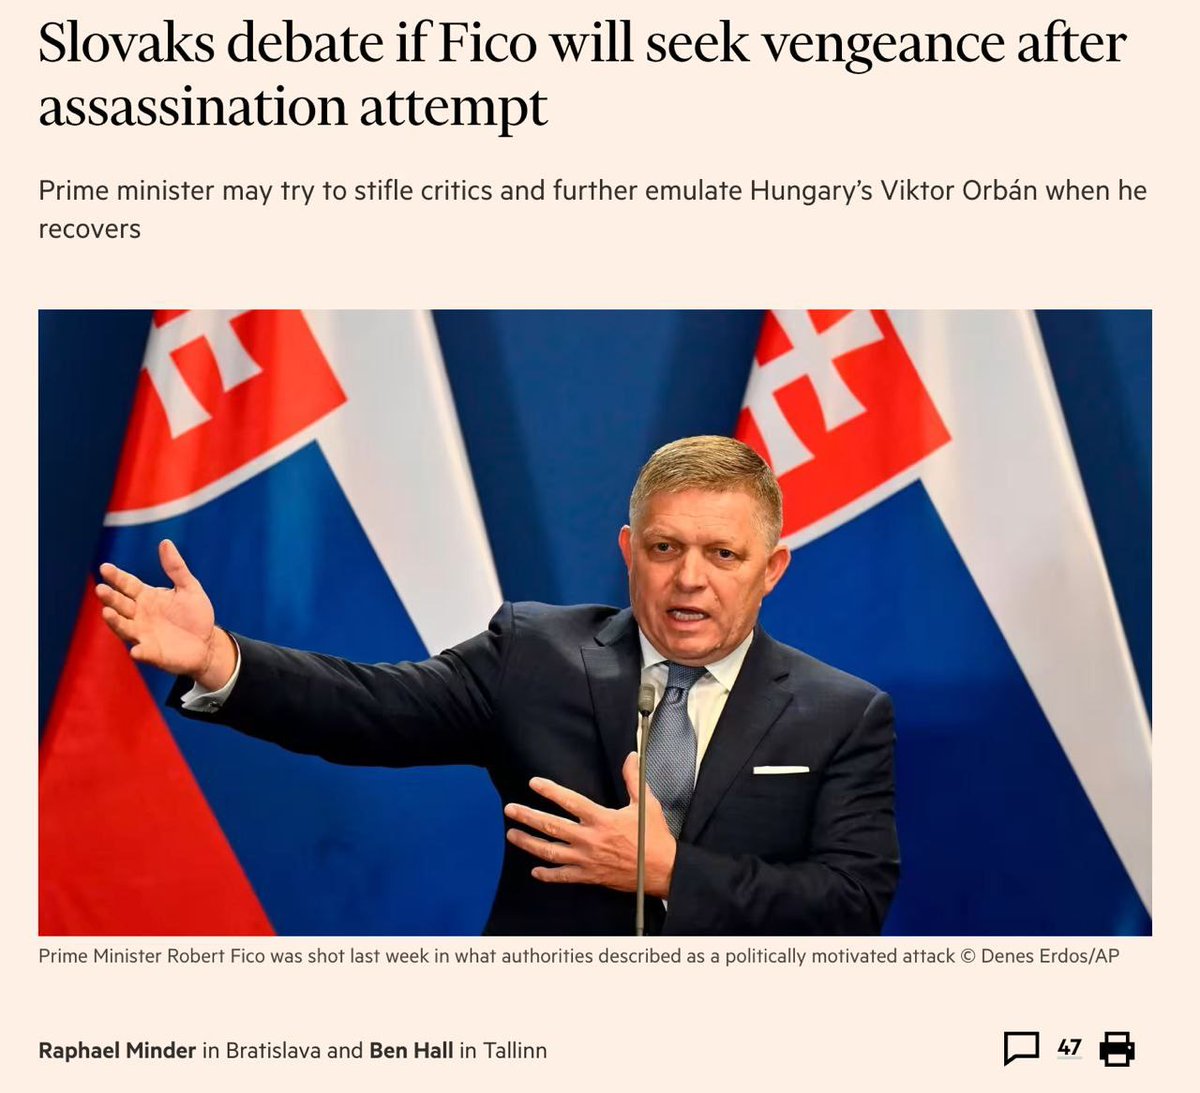 While the Slovakian Prime Minister is recovering from multiple gunshot wounds from the assassination attempt, Financial Times' reporting is devoted to smearing him with speculations of possible 'vengeance'.